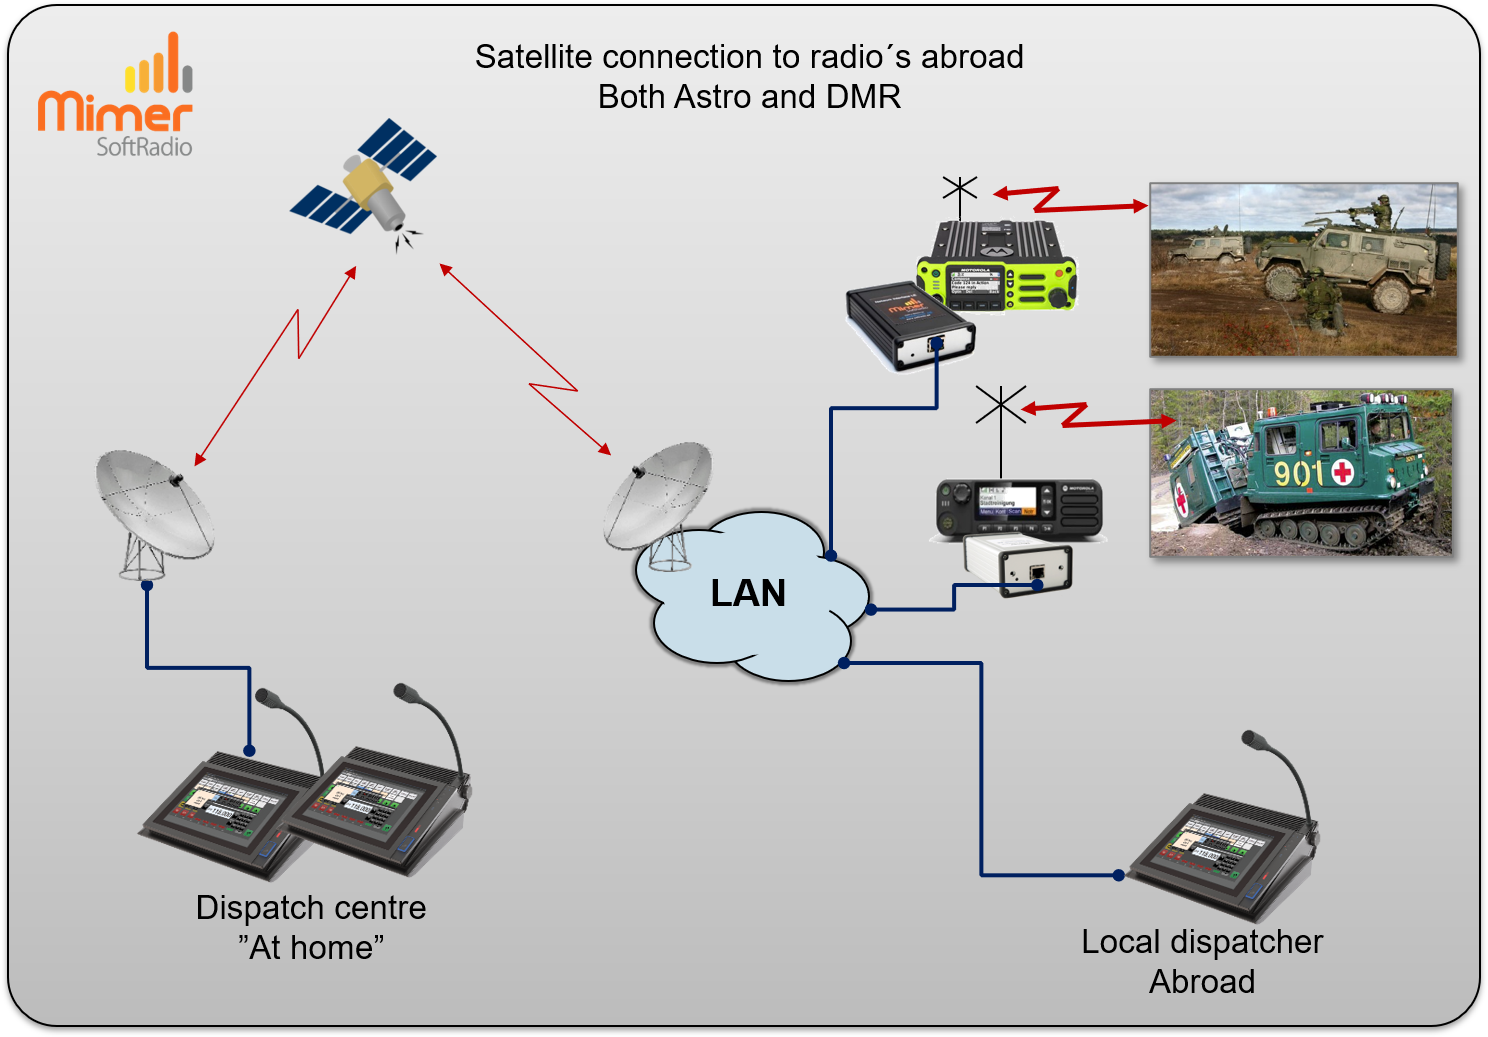 Keeping in contact with forces abroad using SoftRadio connected over satellite